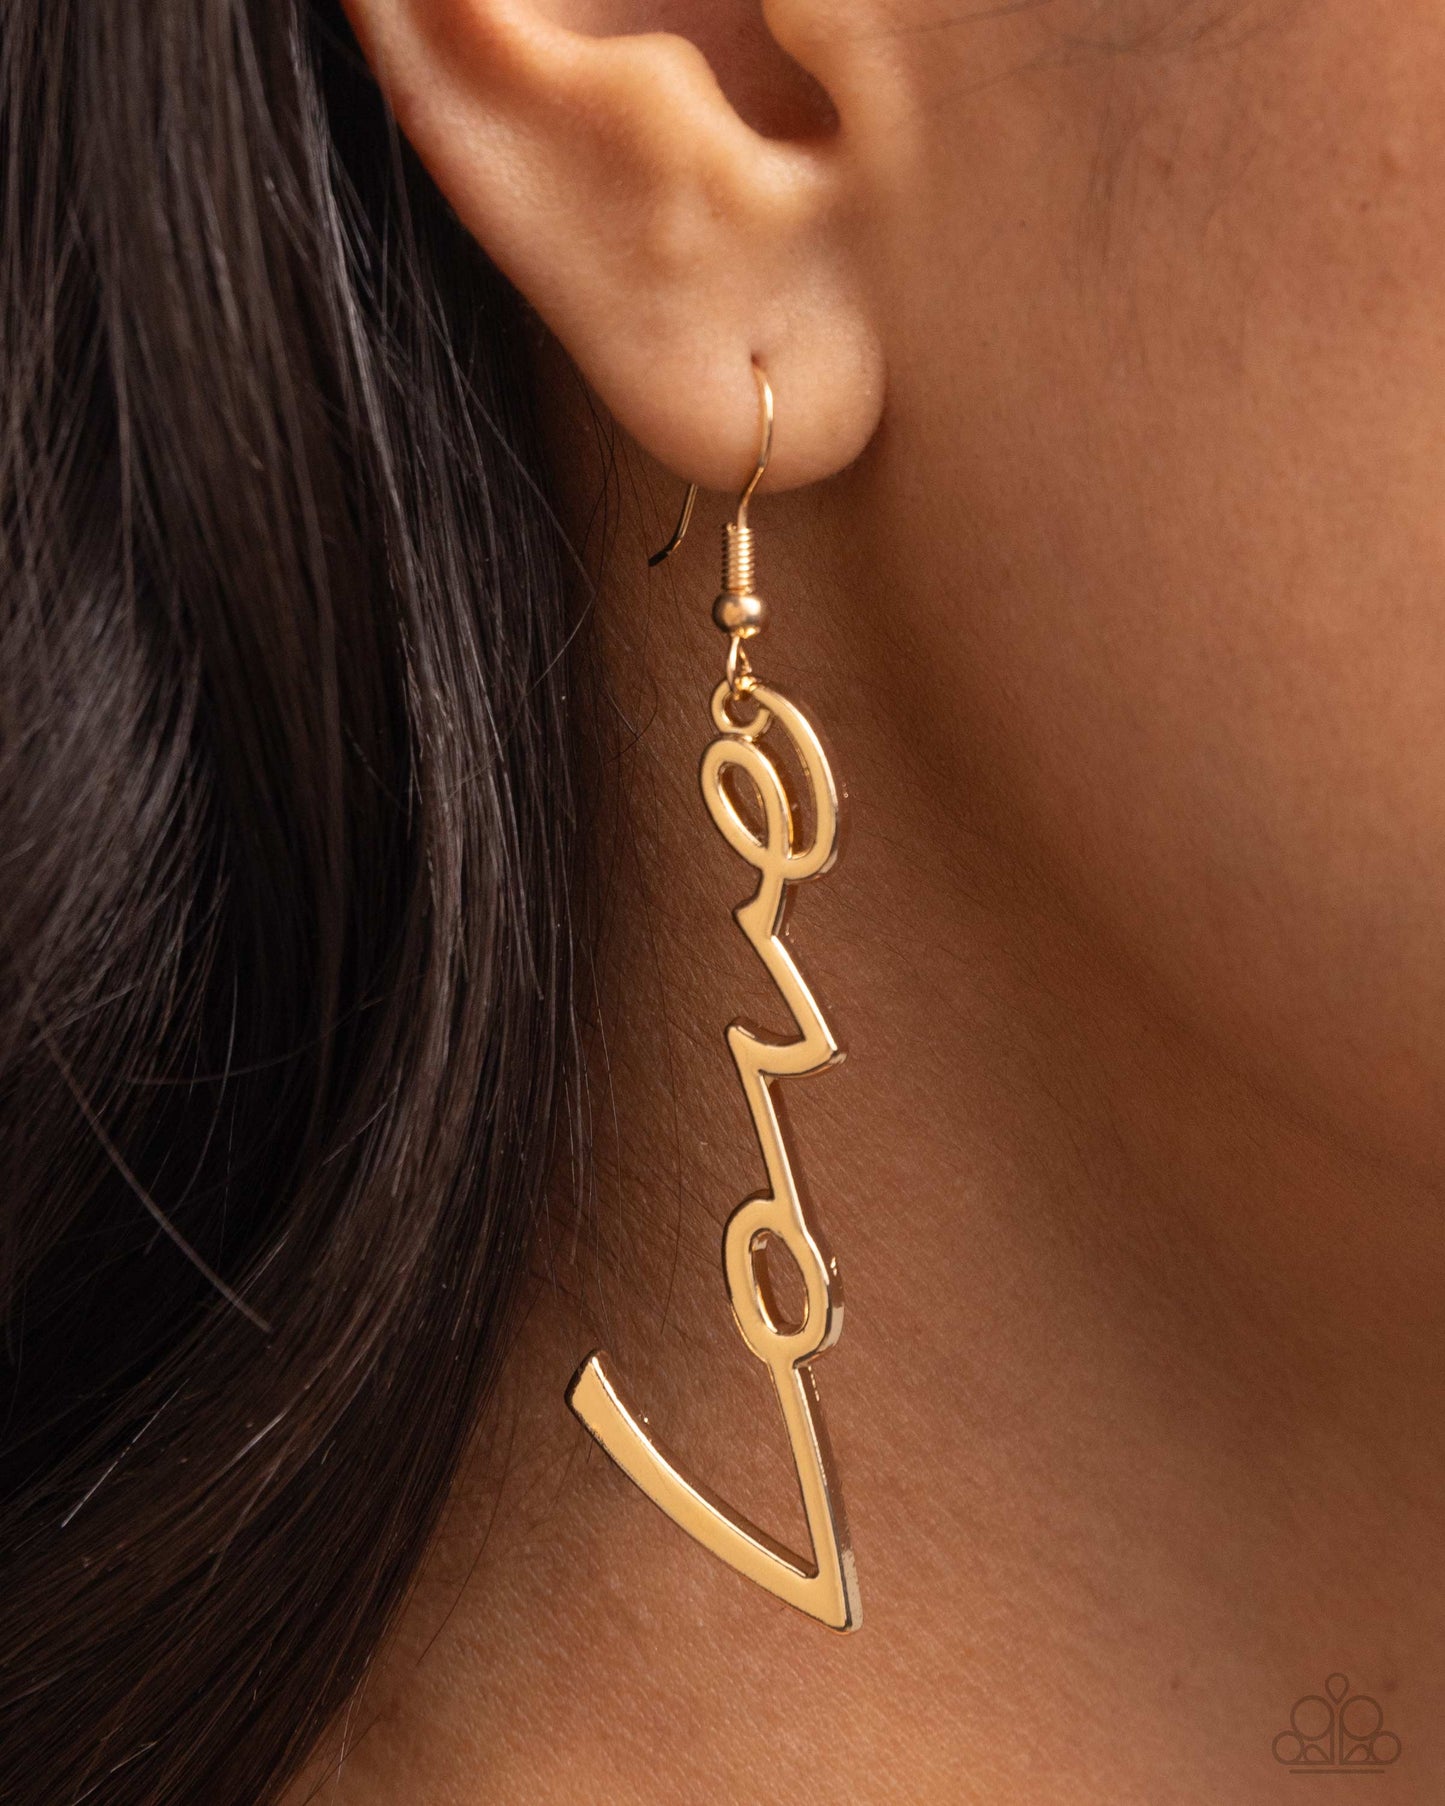 Light-Catching Letters - Gold "LOVE" Paparazzi Earrings